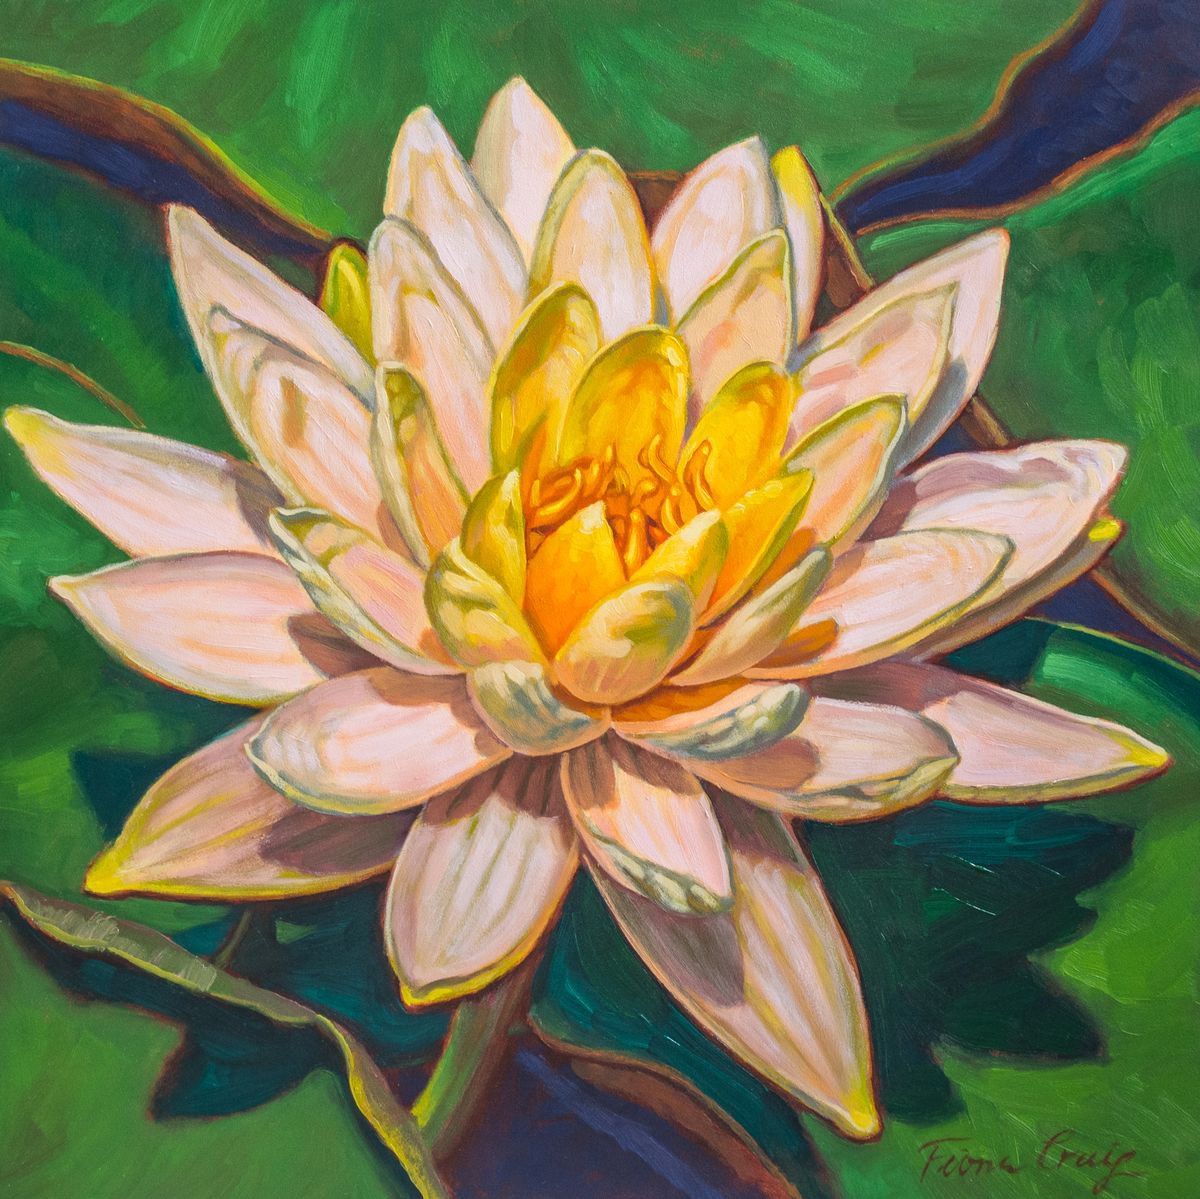 Water Lily Study 2 by Fiona Craig